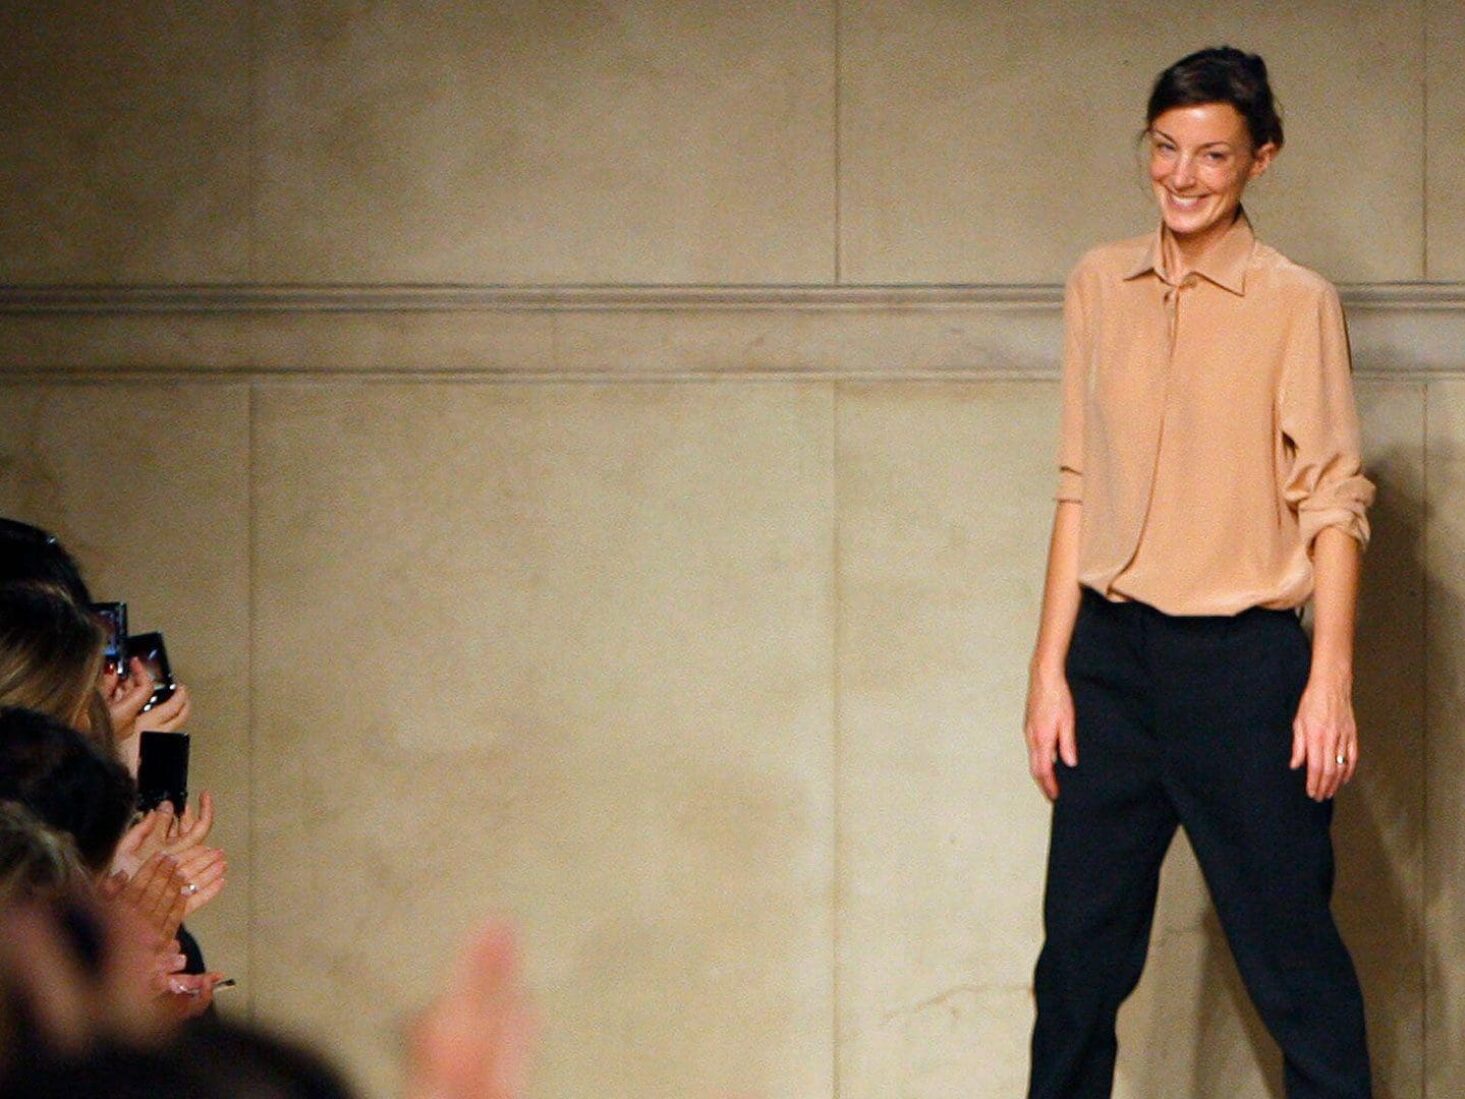 The enduring appeal of Phoebe Philo